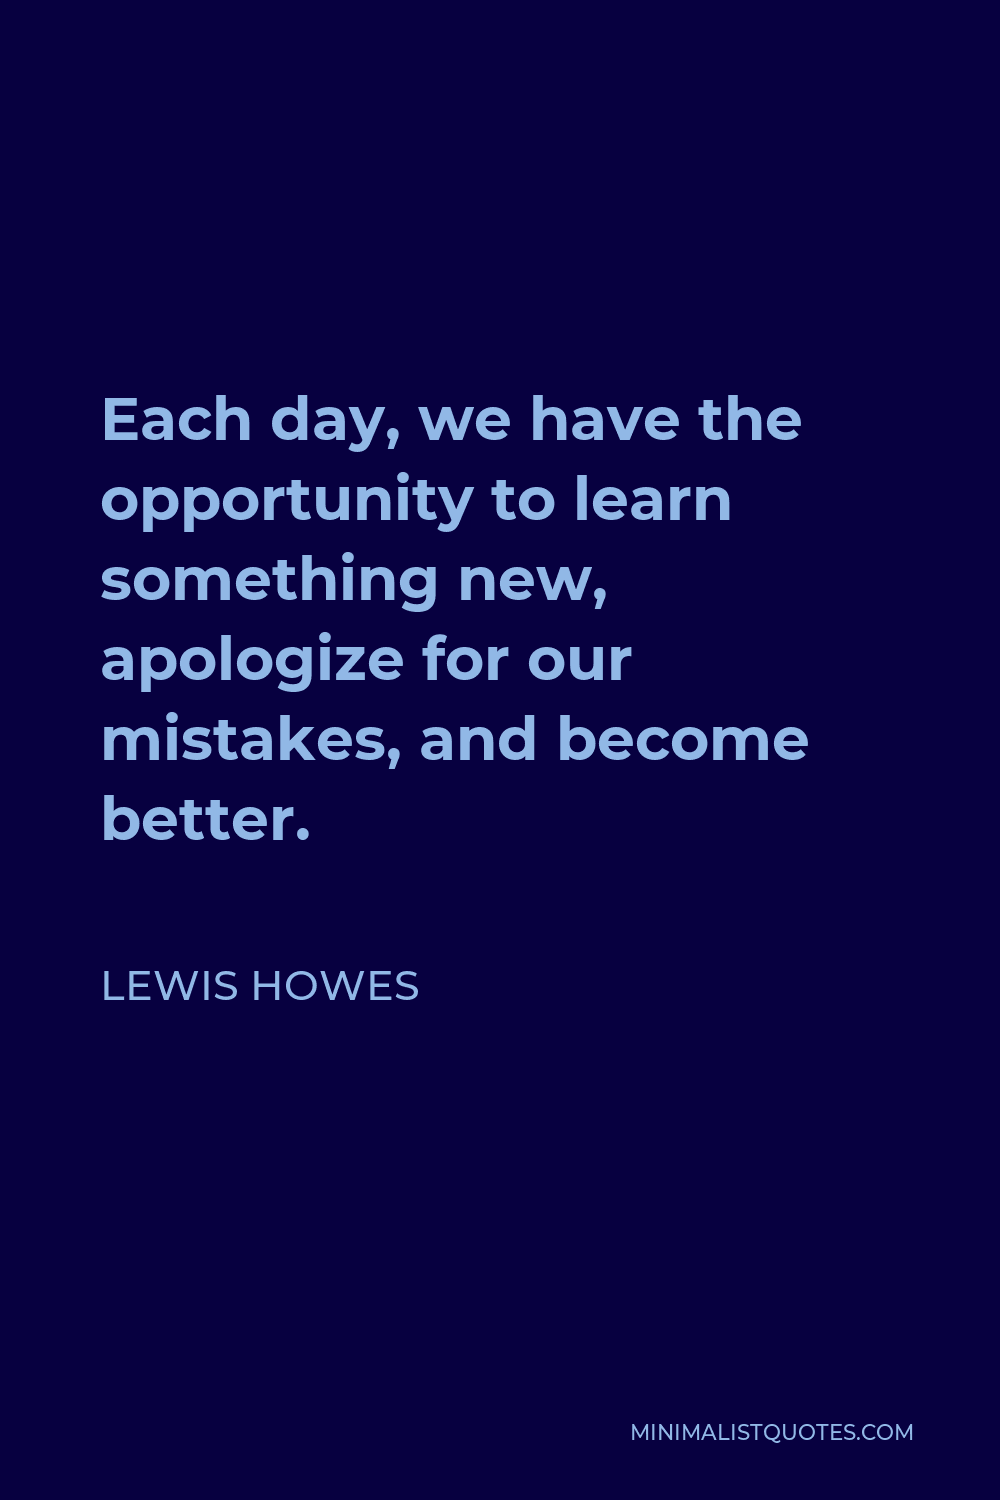 Lewis Howes Quote - Each day, we have the opportunity to learn something new, apologize for our mistakes, and become better.